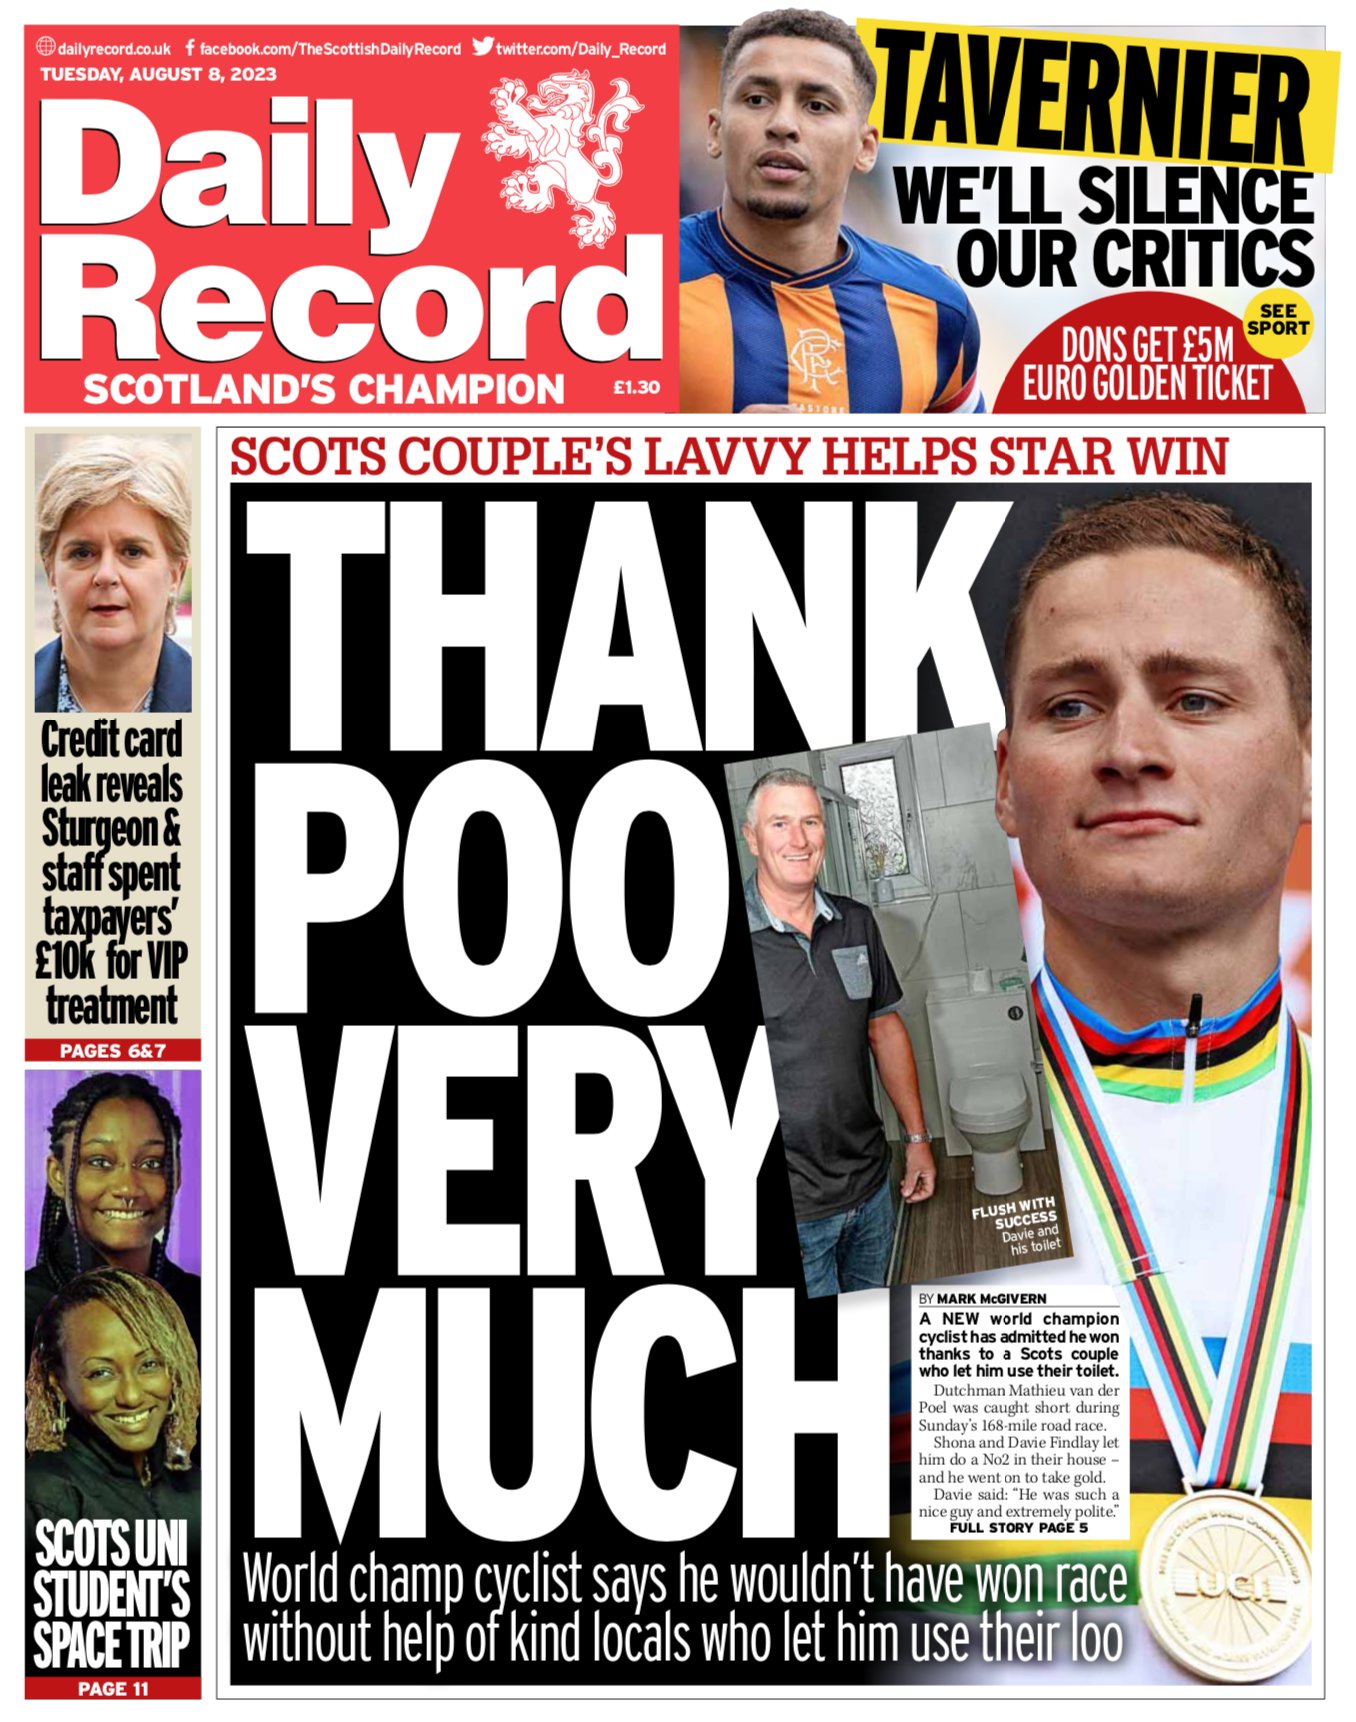 The front page of Scotland's Daily Record tabloid newspaper, which features a main story about Mathieu van der Poel using a homeowner's bathroom at the World Championships in Glasgow when the road race had a lengthy neutralization for protesters blocking the route. The Record's headline is "Thank Poo Very Much" and claims Van der Poel said he wouldn't have won the race had he not been able to go.